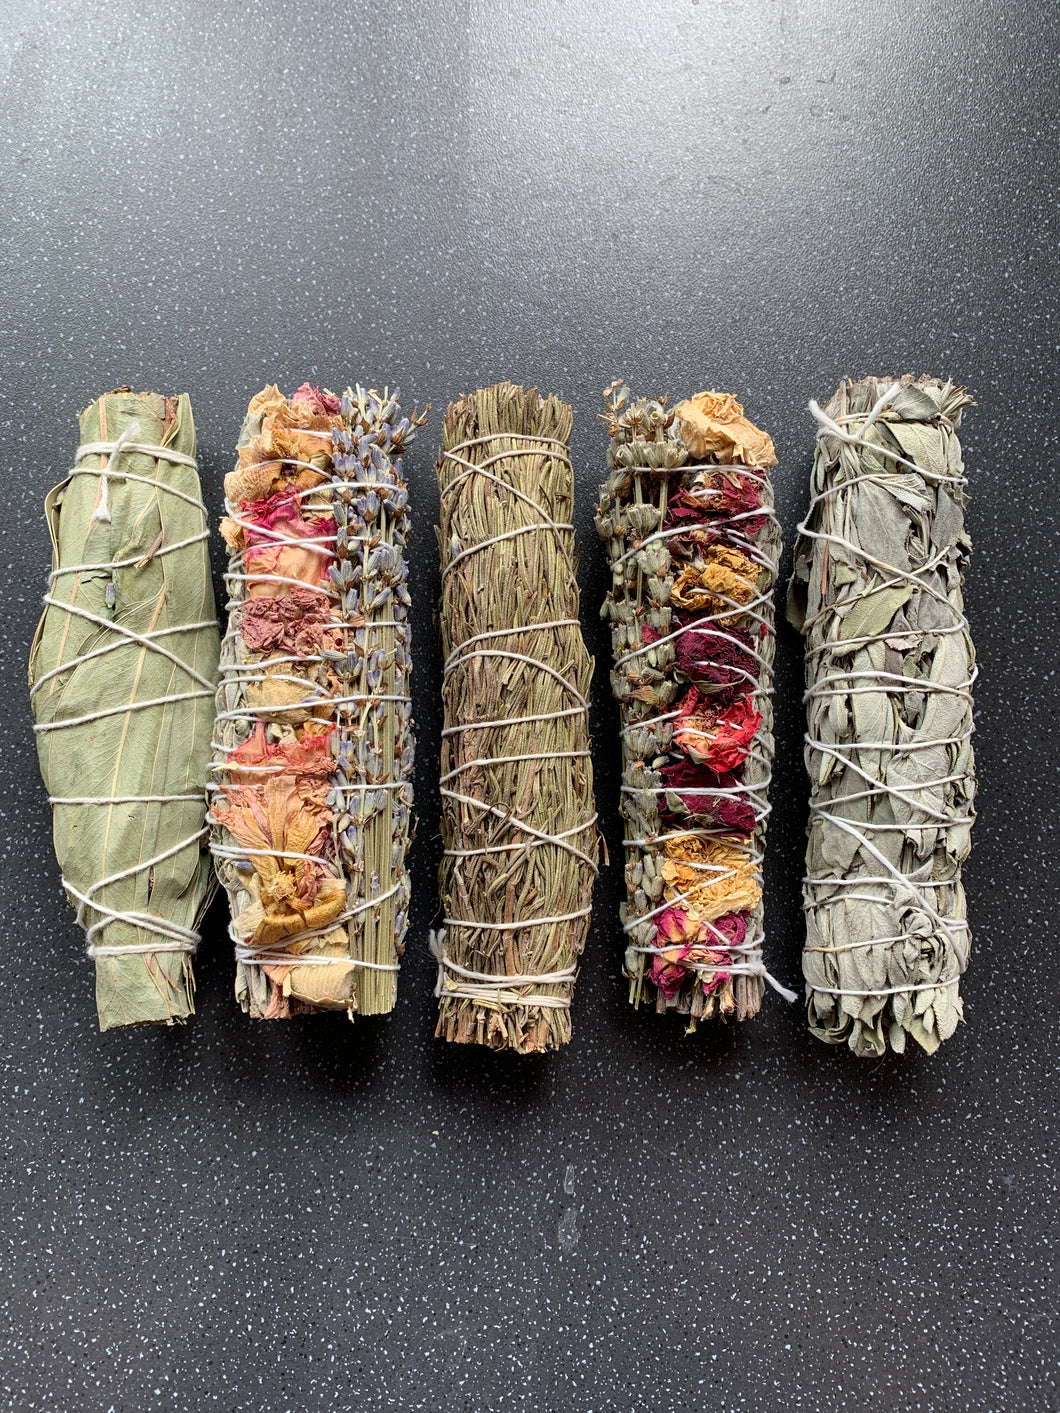 5 Sage Bundles Ultimate Manifesting Bundle For Love, Money, Peace, Anxiety Relief,  Cleansing, Strength & Evil Eye Protection Items